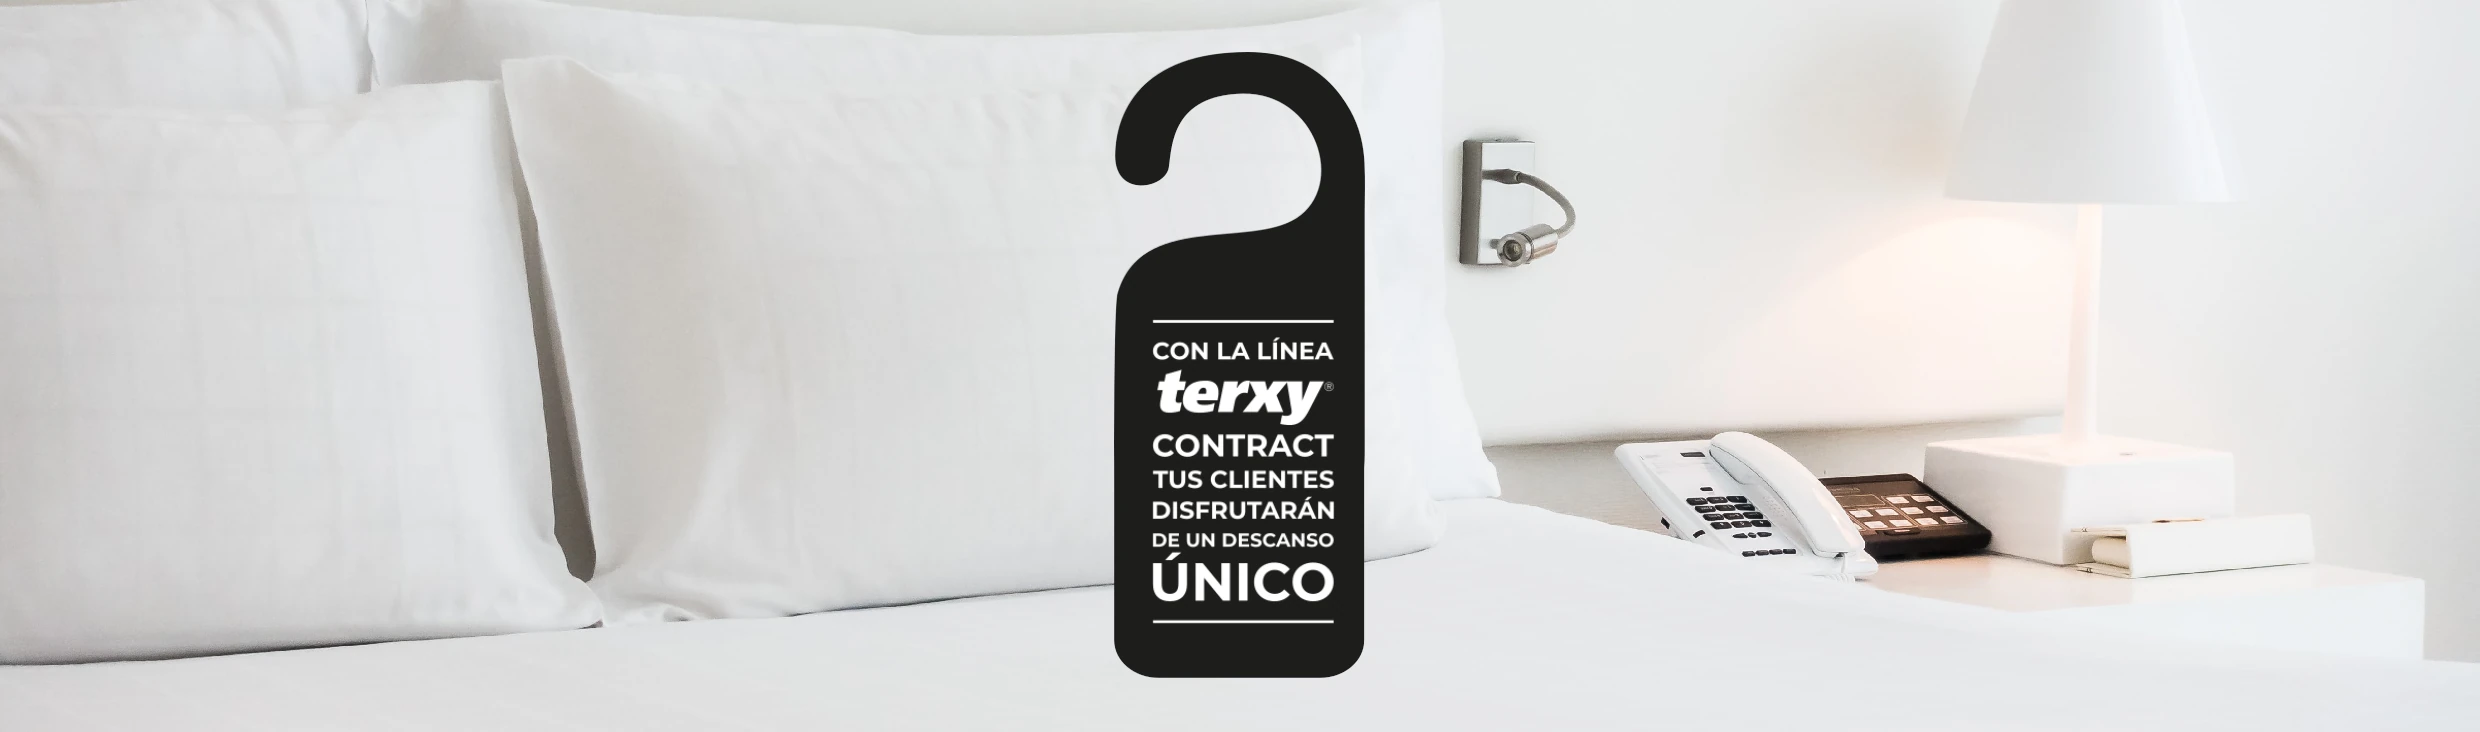 Cabecera hotel contract terxy